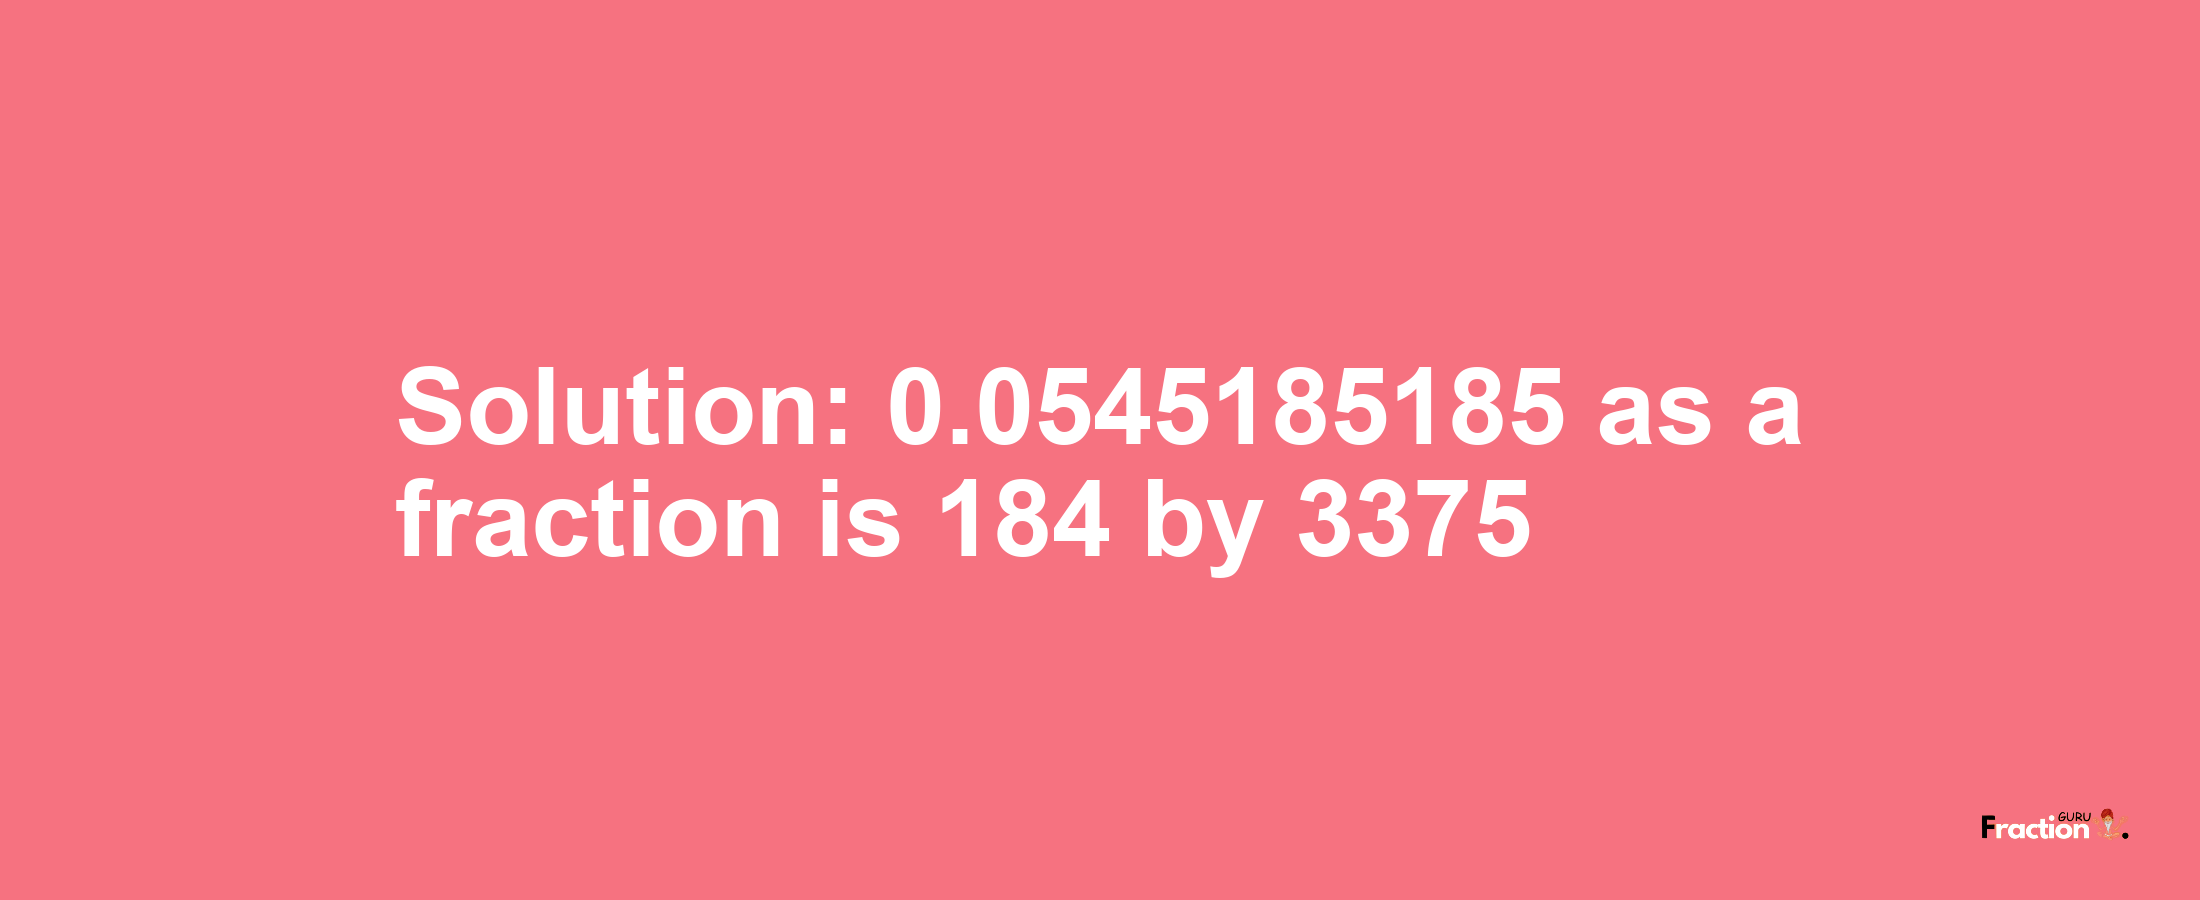 Solution:0.0545185185 as a fraction is 184/3375